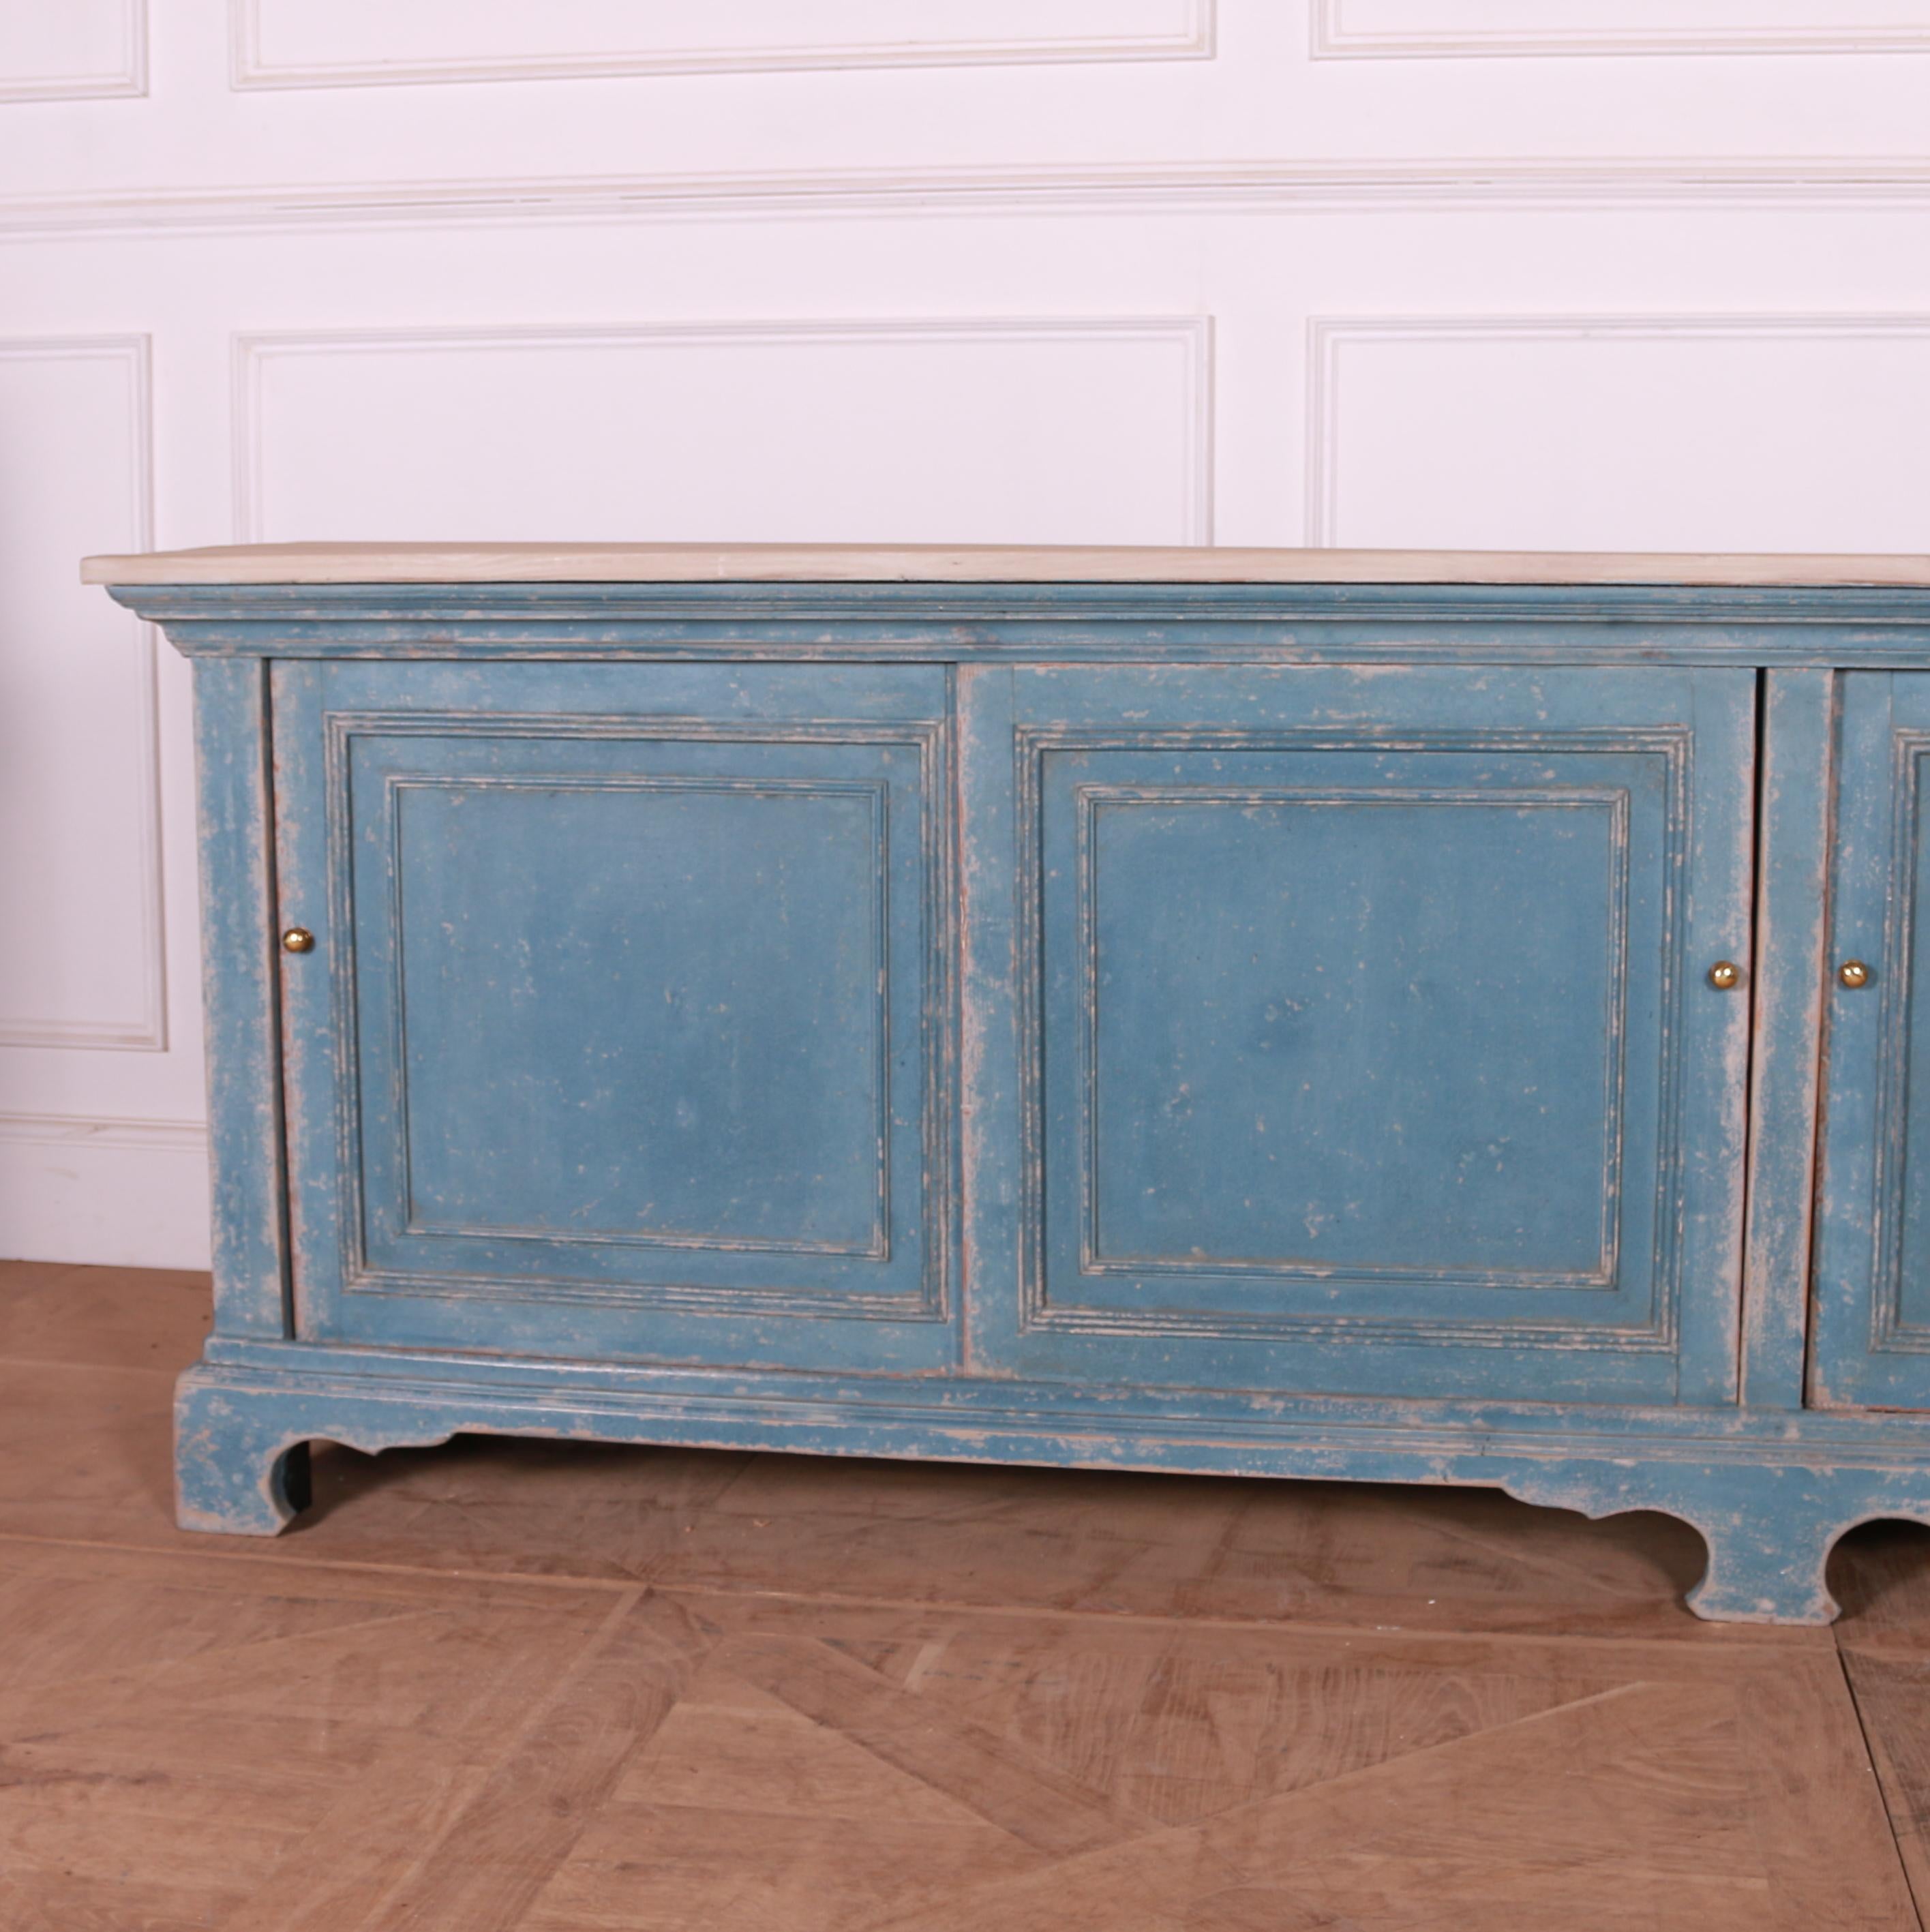 Large 19th C stylish painted pine dresser base / sideboard with four sliding doors. 1840.

Internal shelf depth of 37 cms.

Reference: 7710

Dimensions
104 inches (264 cms) Wide
19.5 inches (50 cms) Deep
32 inches (81 cms) High